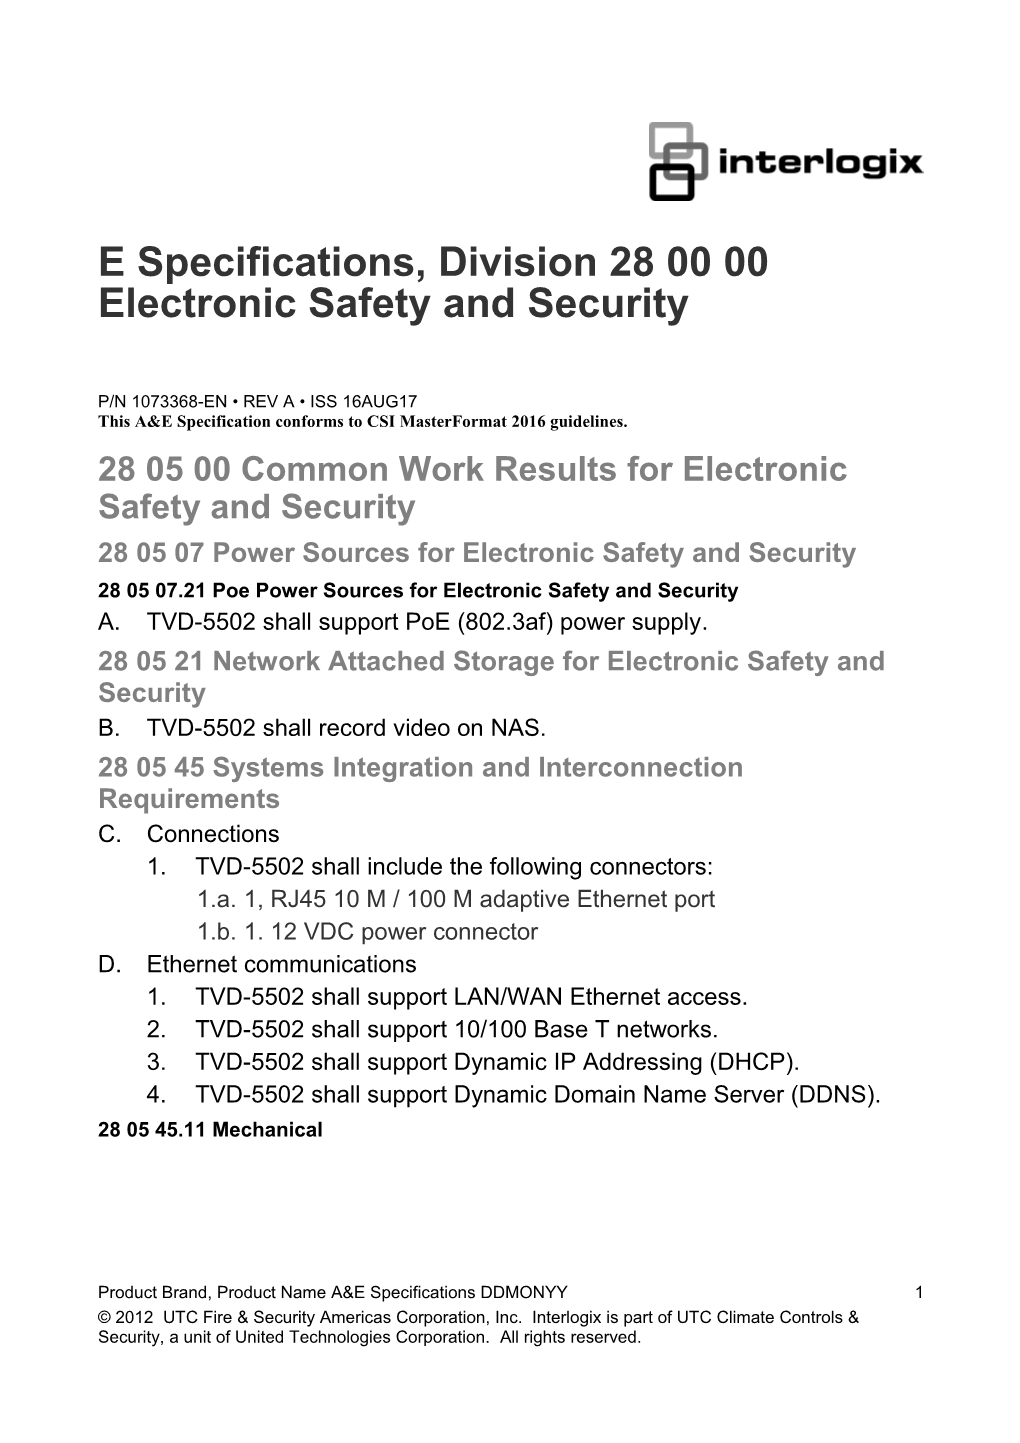 TVD-5502 IP S5 Camera A&E Specifications, Division 28 00 00 Electronic Safety and Security